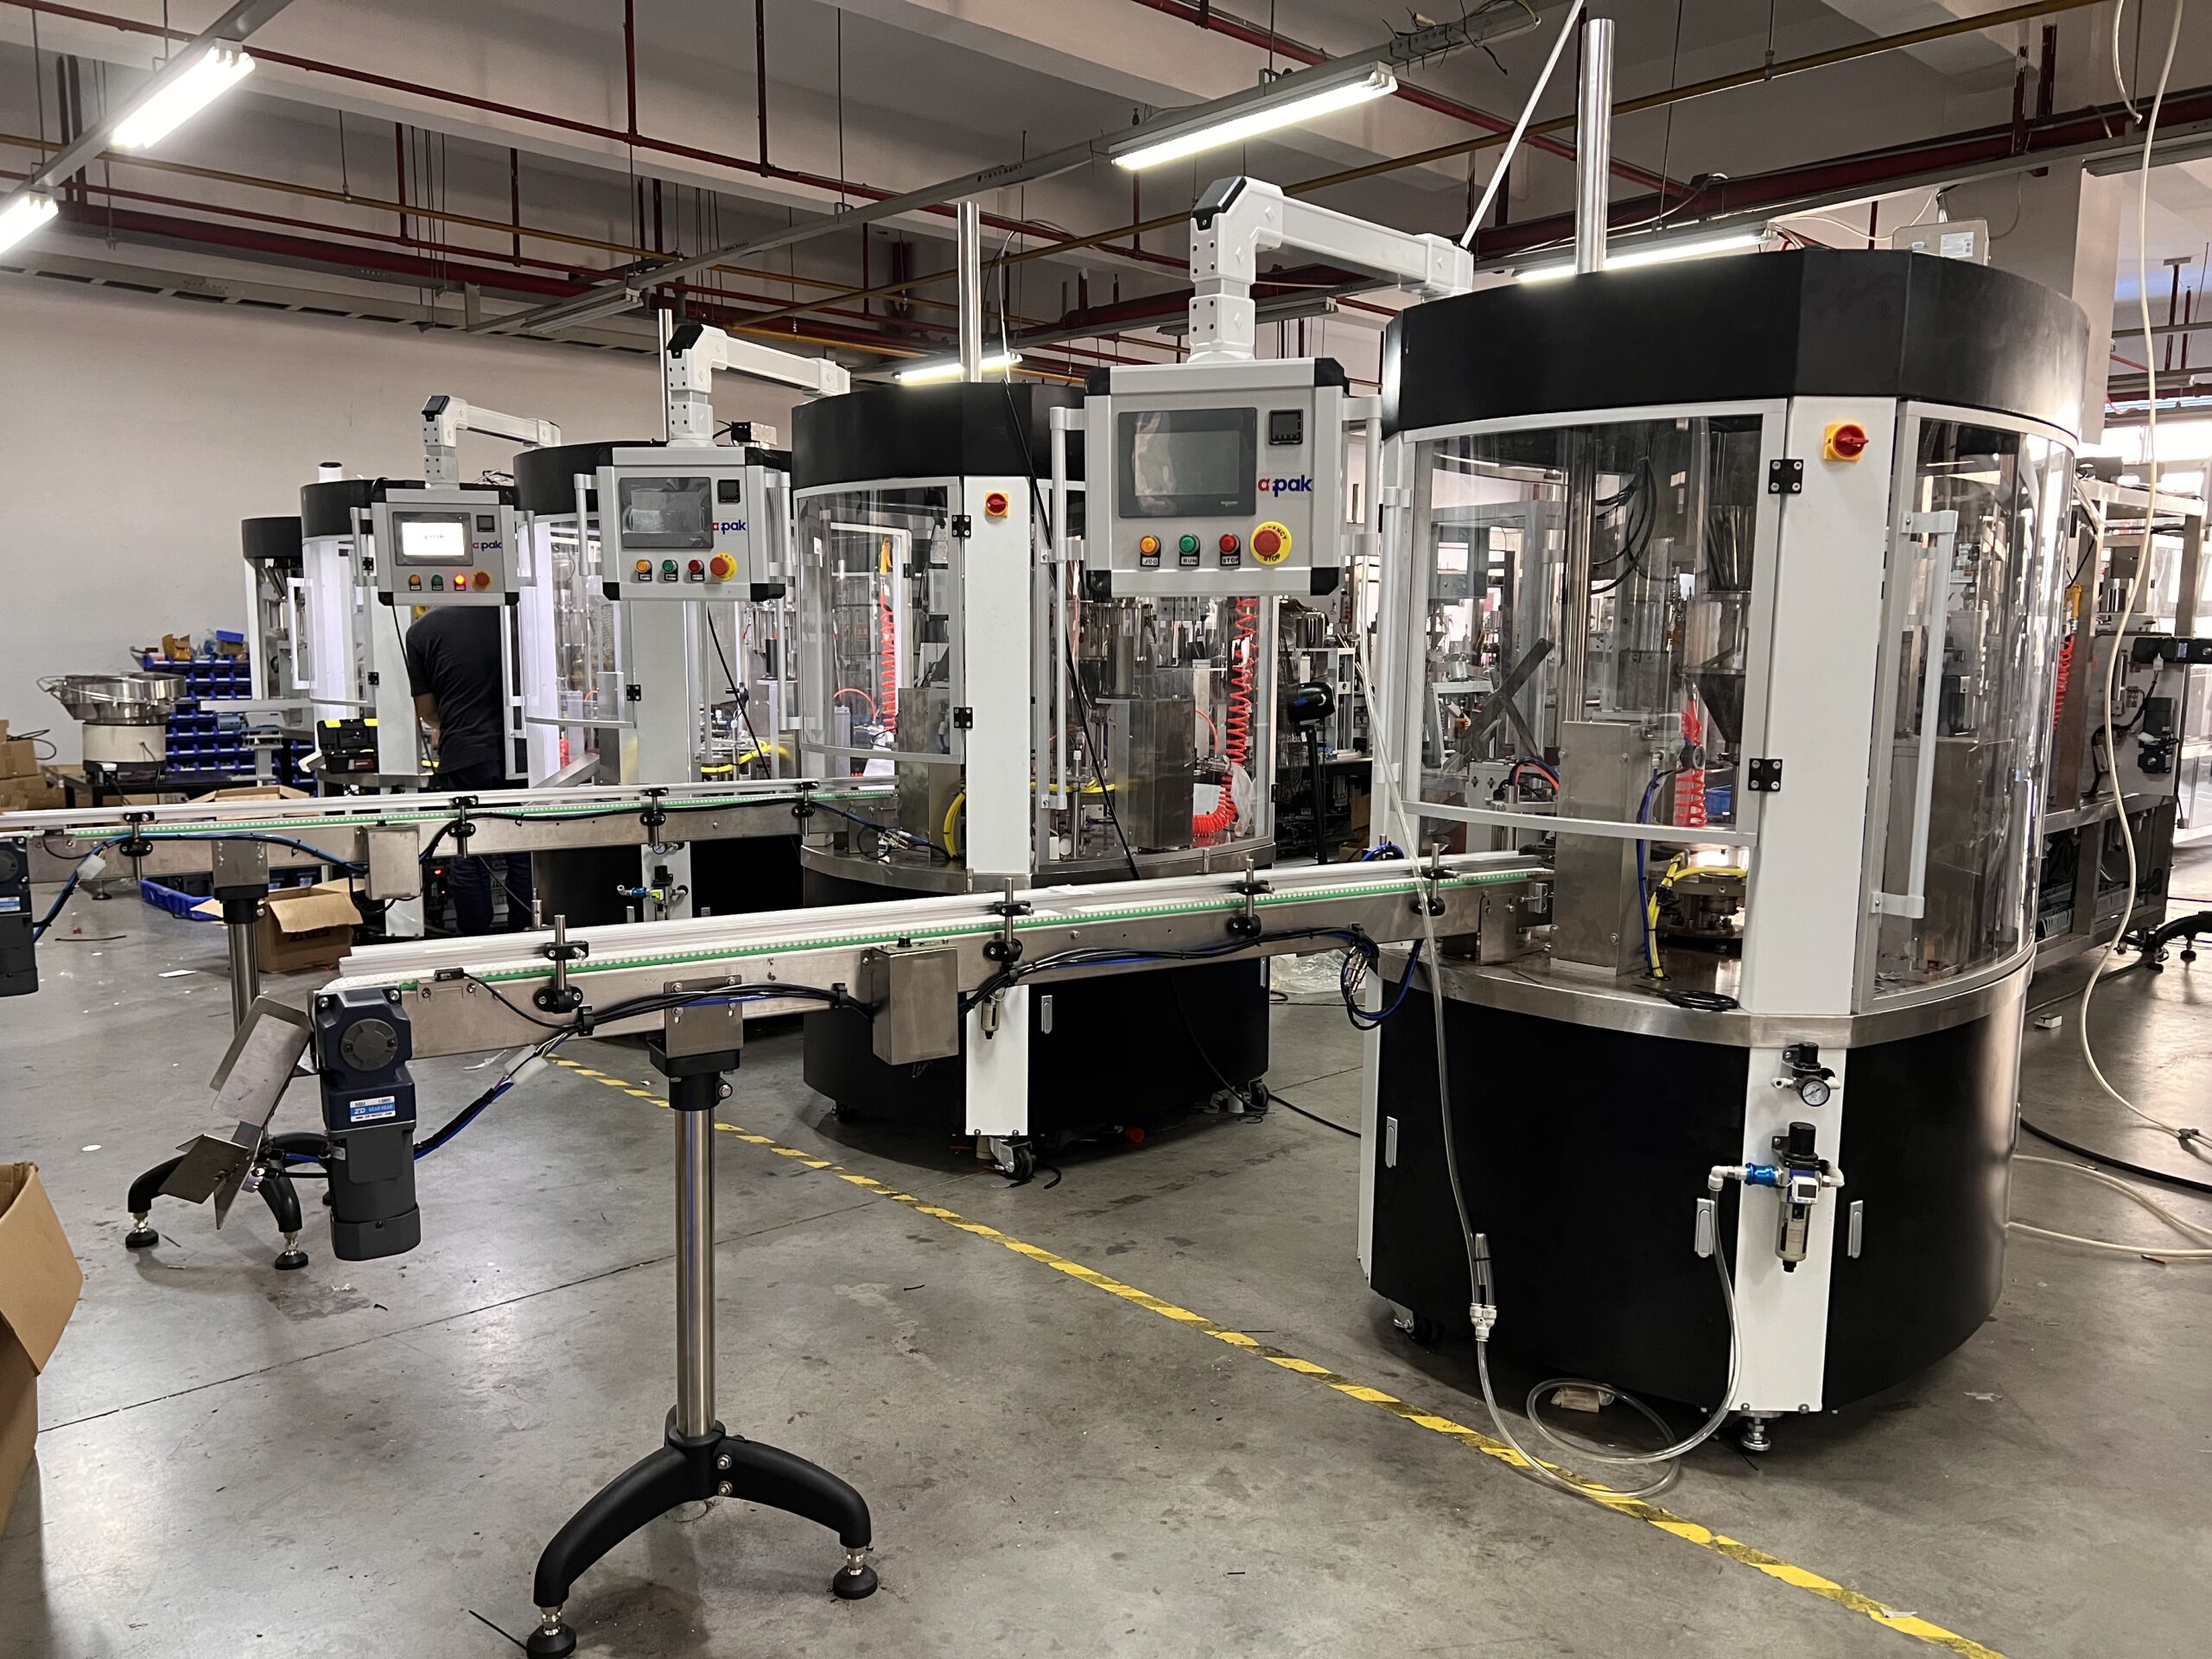 iCoffee Opus: An Interesting Twist On The K-Cup Brewer  Nespresso Capsules  Filling Sealing Machine, KCups Filling Sealing Machine, Coffee Capsules  Filling Sealing Machine